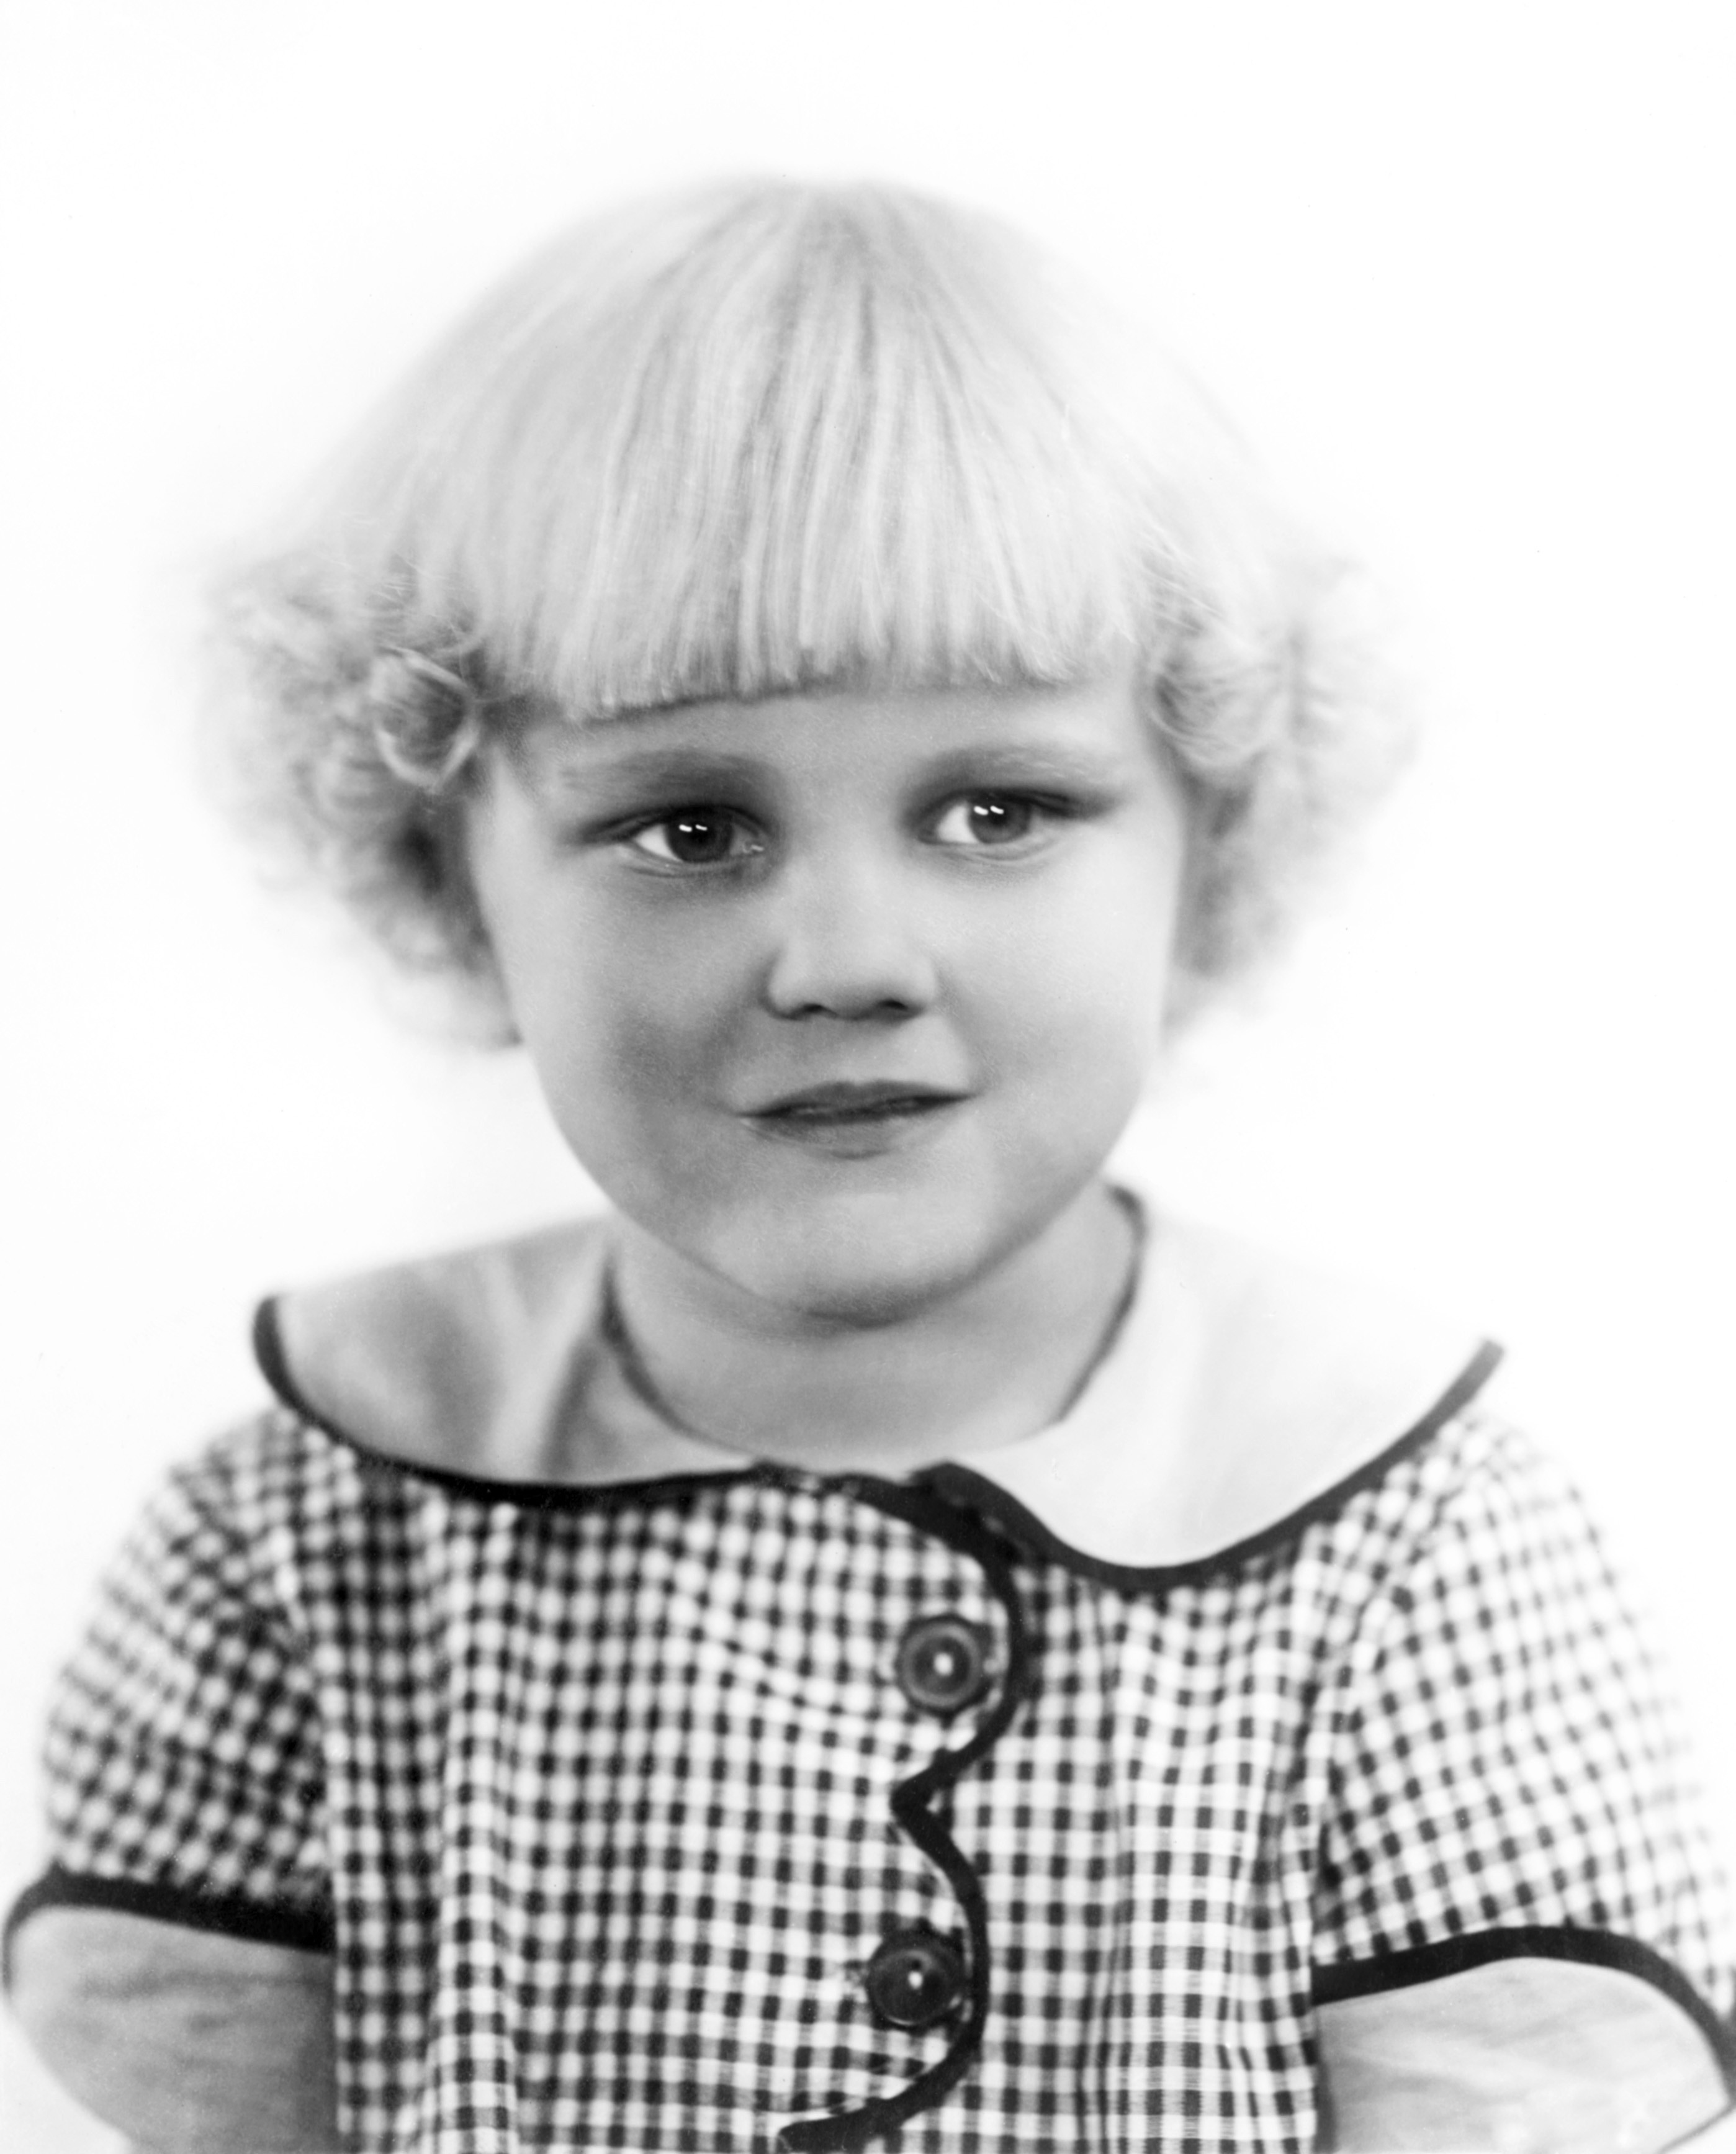 Jean Darling in a publicity shot for the Our Gang (Little Rascals) comedies, 1927. (Everett Collection)